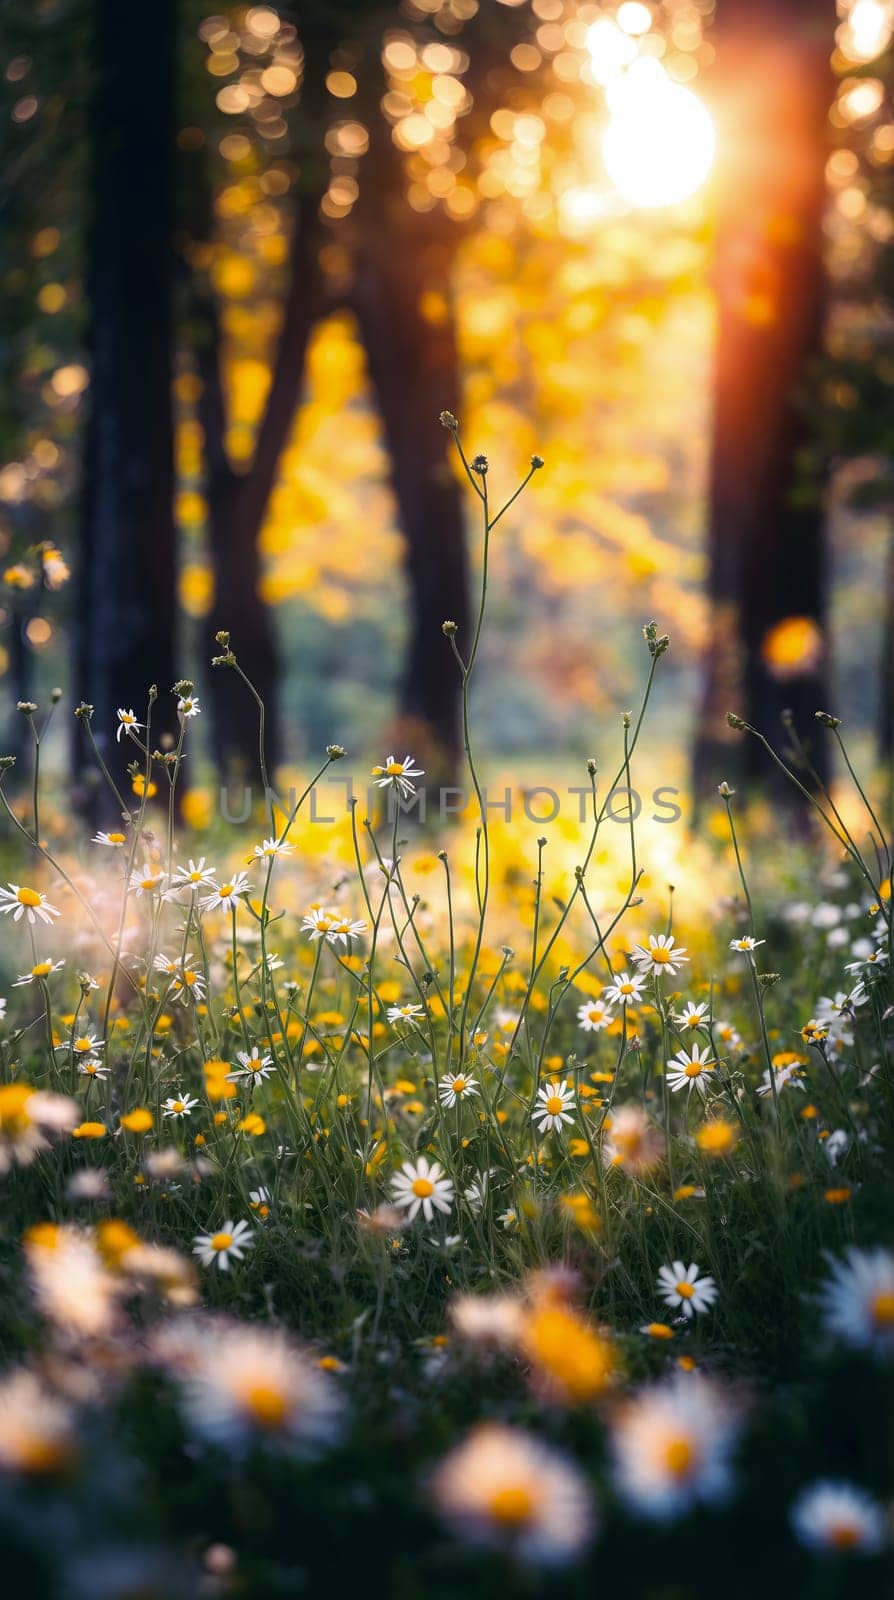 Sunlit Field of Daisies and Wildflowers by chrisroll